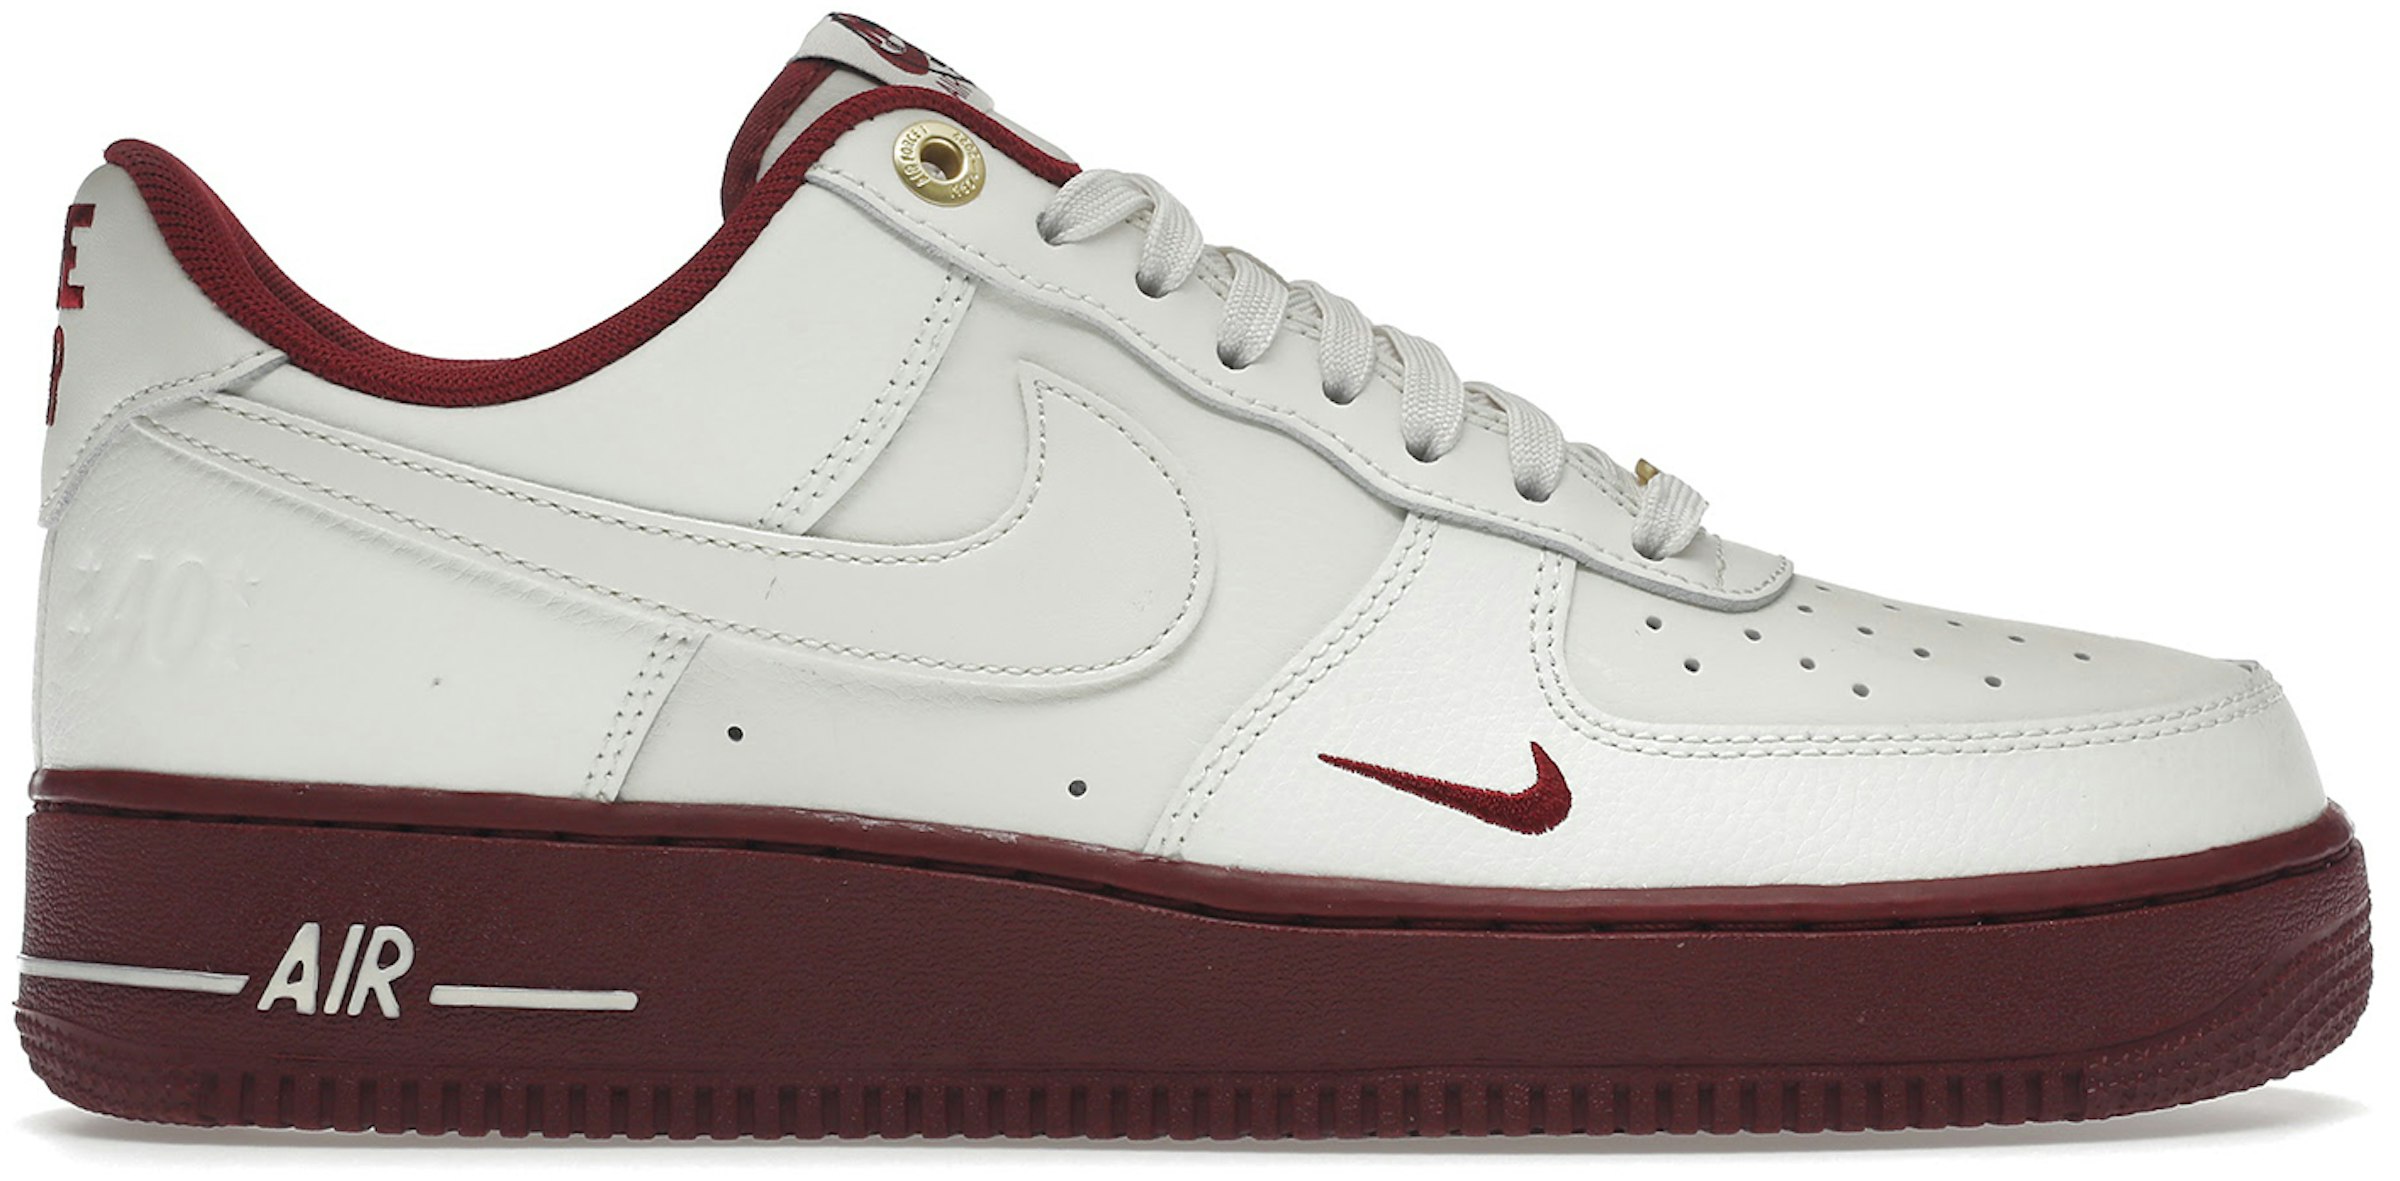 Seguir mano realimentación Nike Air Force 1 Low '07 SE 40th Anniversary Edition Sail Team Red  (Women's) - DQ7582-100 - US